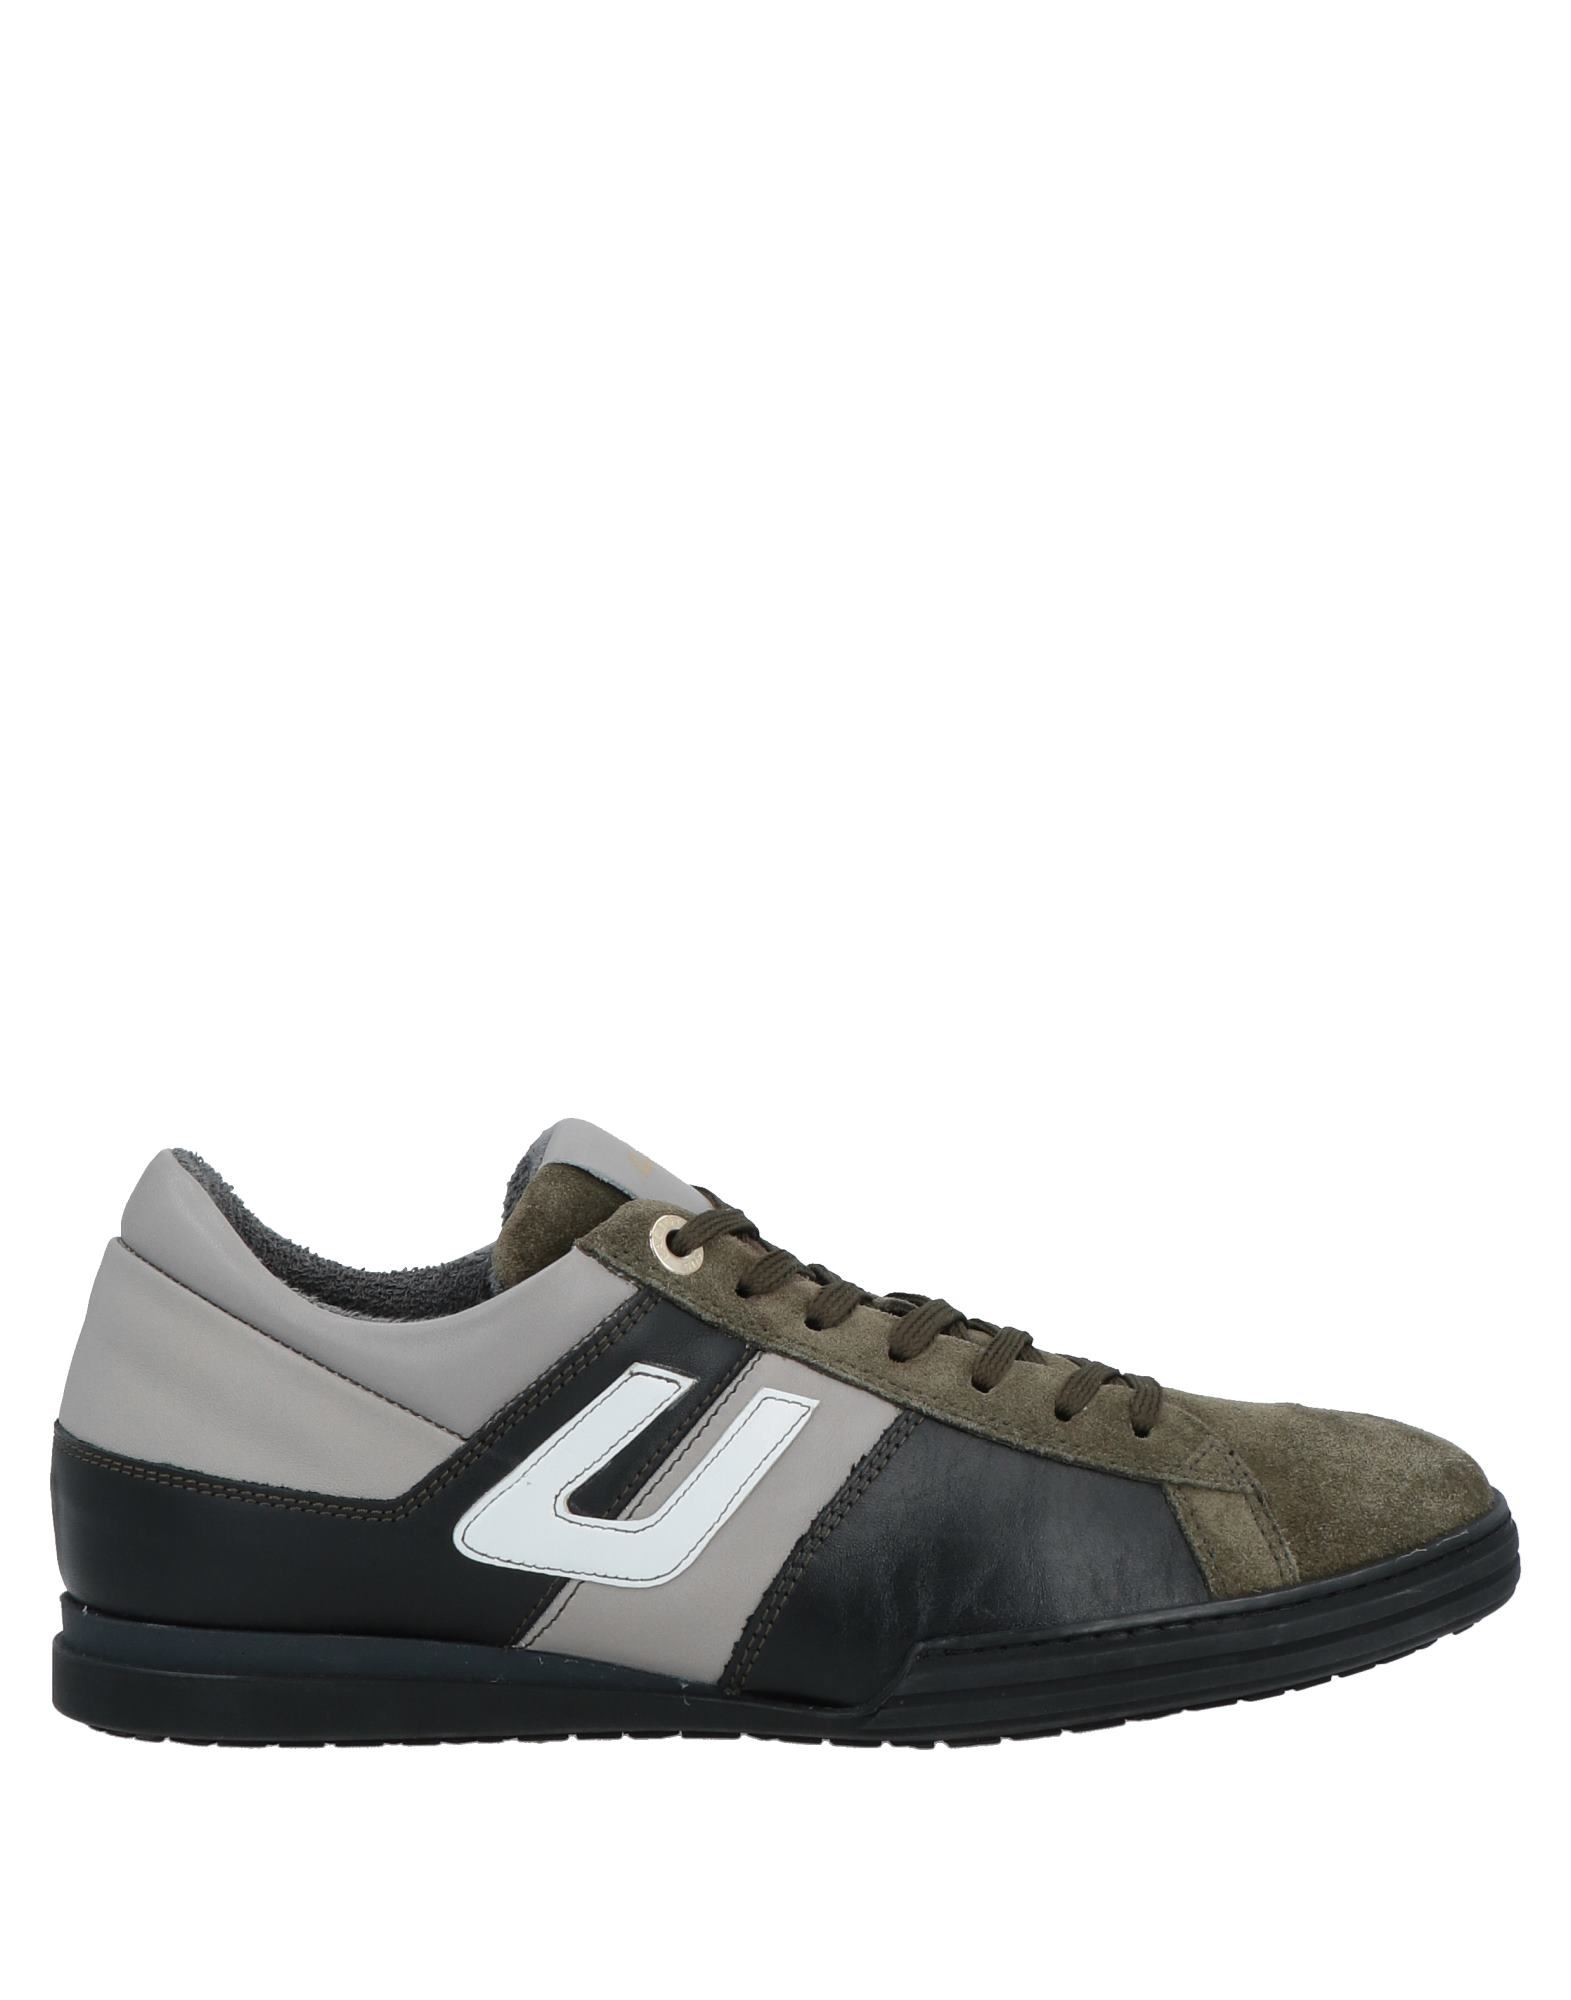 Countryside Deliberately order Cesare Paciotti 4us Sneakers In Military Green | ModeSens